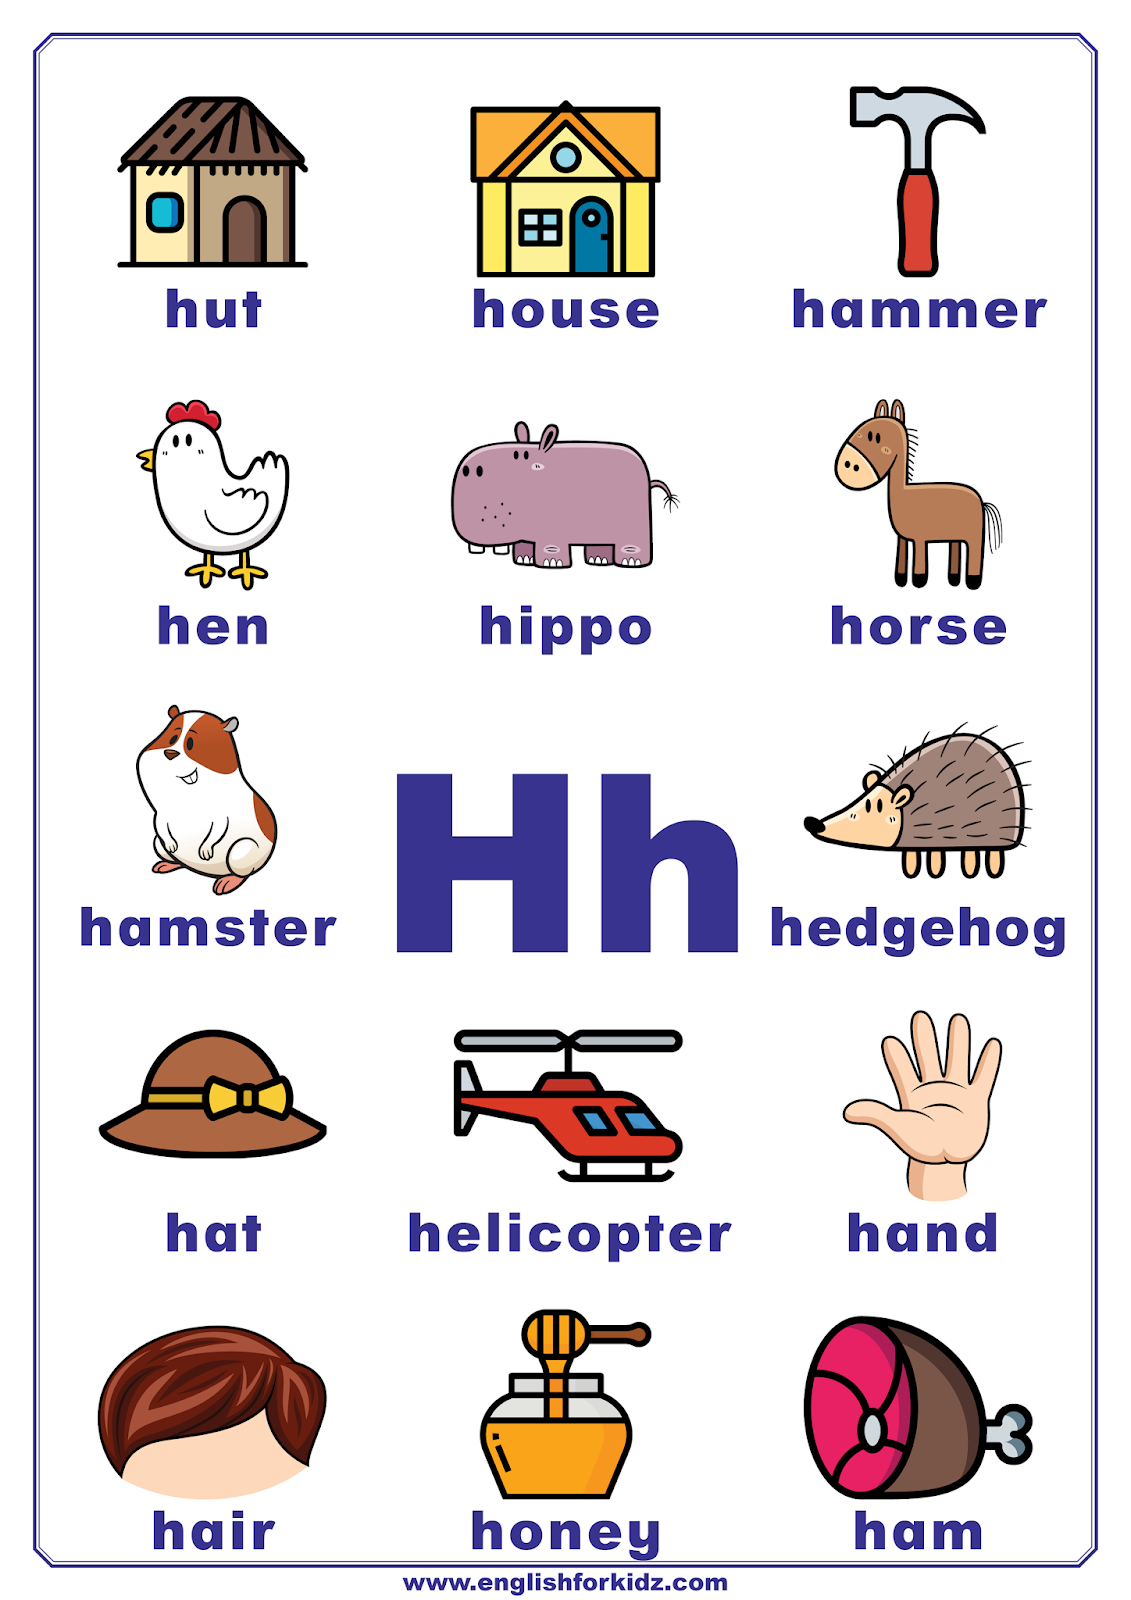 English for Kids Step by Step: Letter H Worksheets, Flash Cards